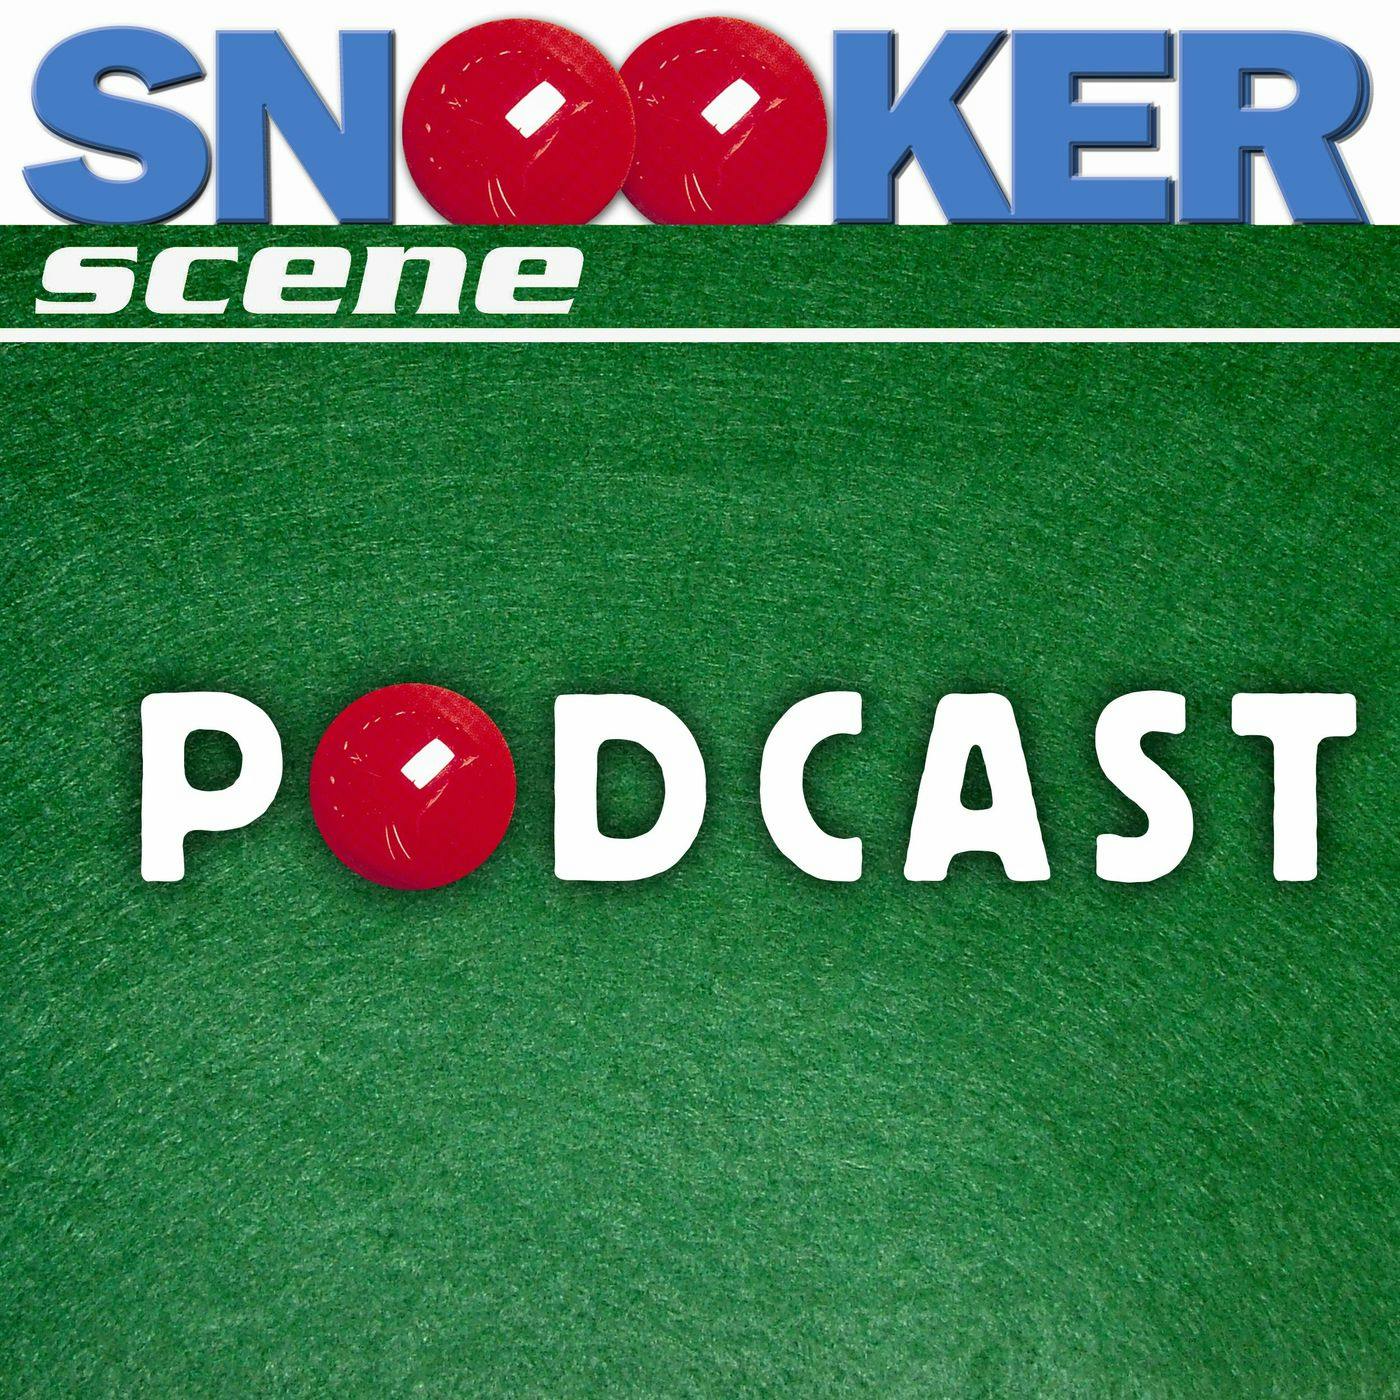 Snooker Scene Podcast episode 184 - His Name is Luca